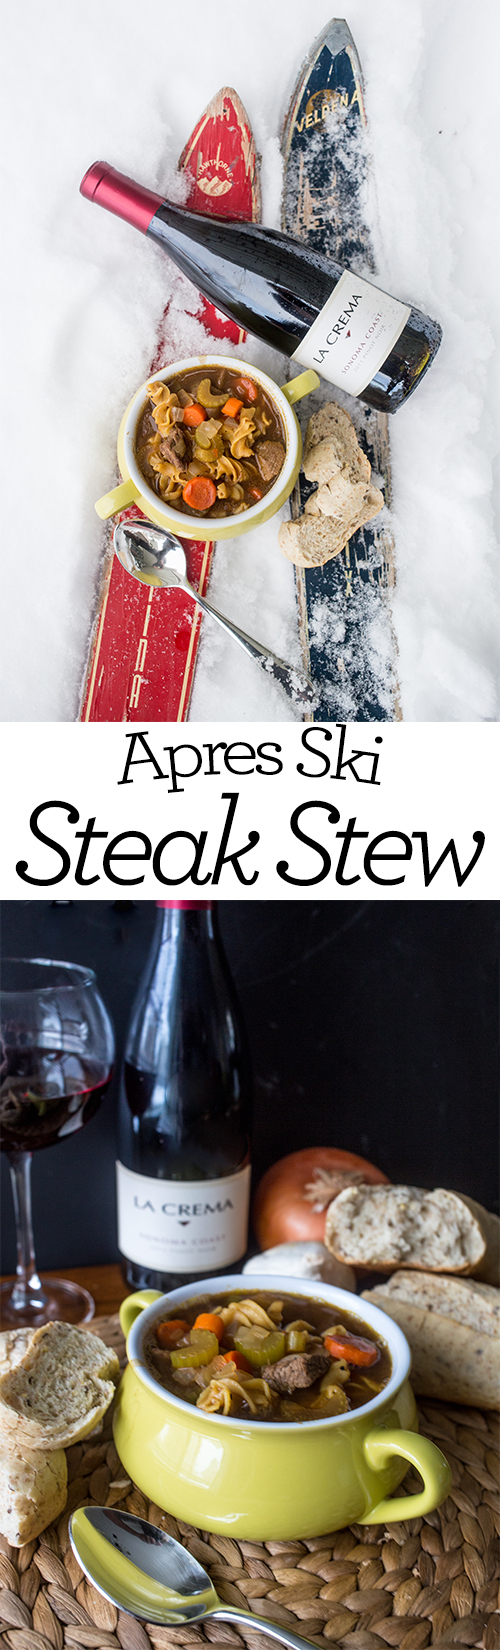 Apres ski steak stew- this is a delicious, hearty meal you can toss into a crockpot before a long day outside!